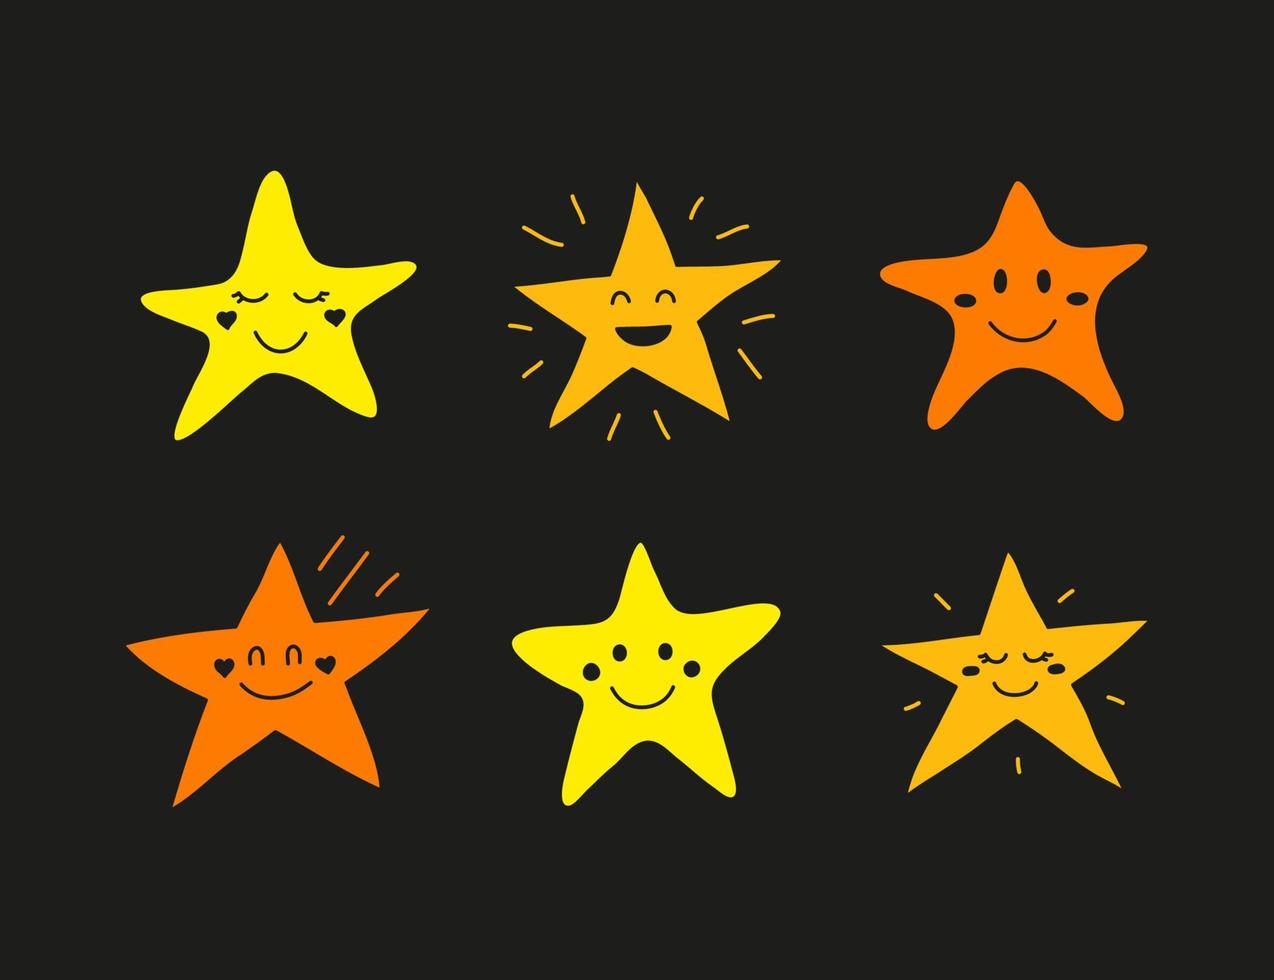 Set of doodle colored star happy character icons isolated on black background. vector